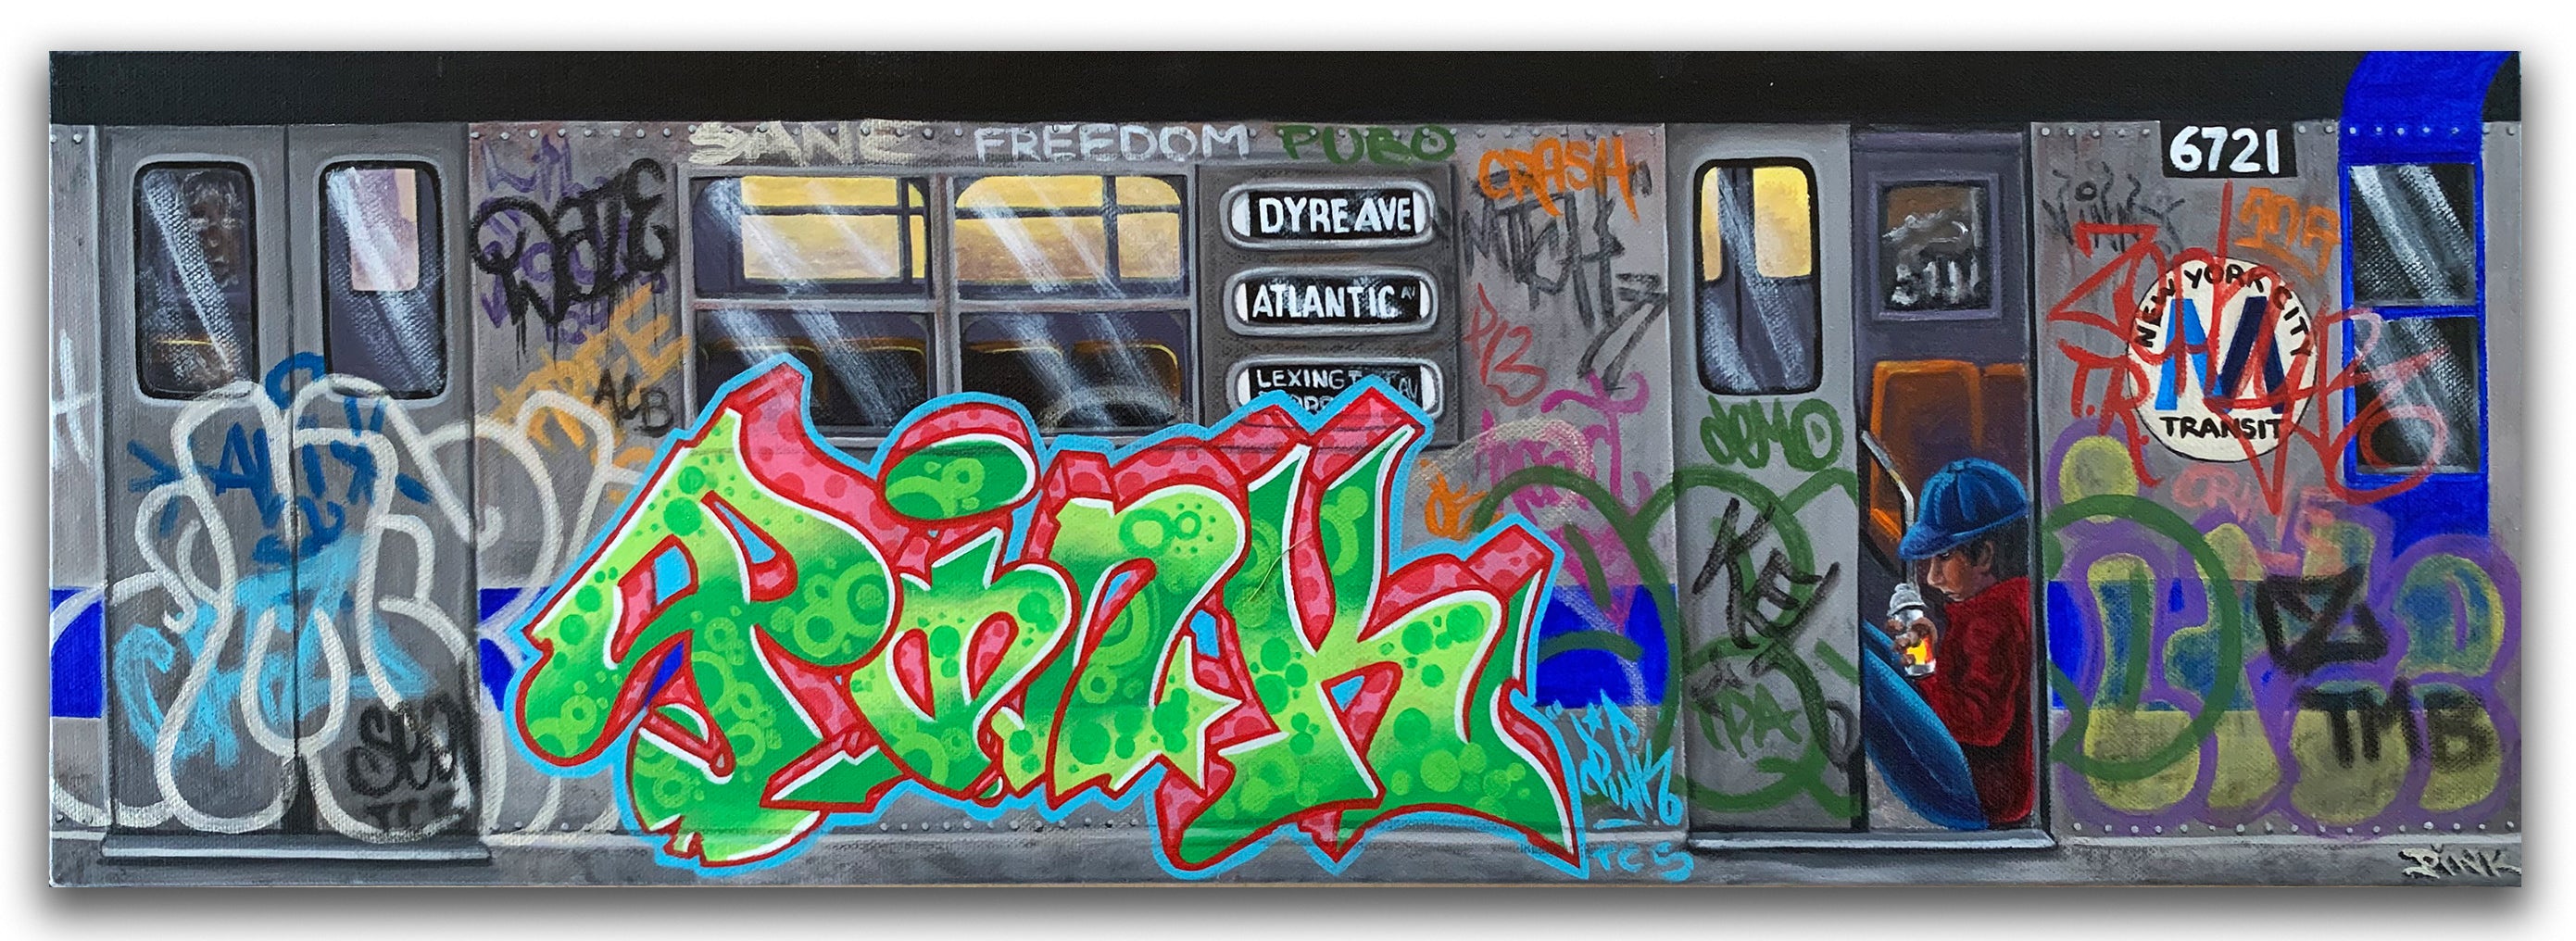 LADY PINK- "Dyre Ave" Painting